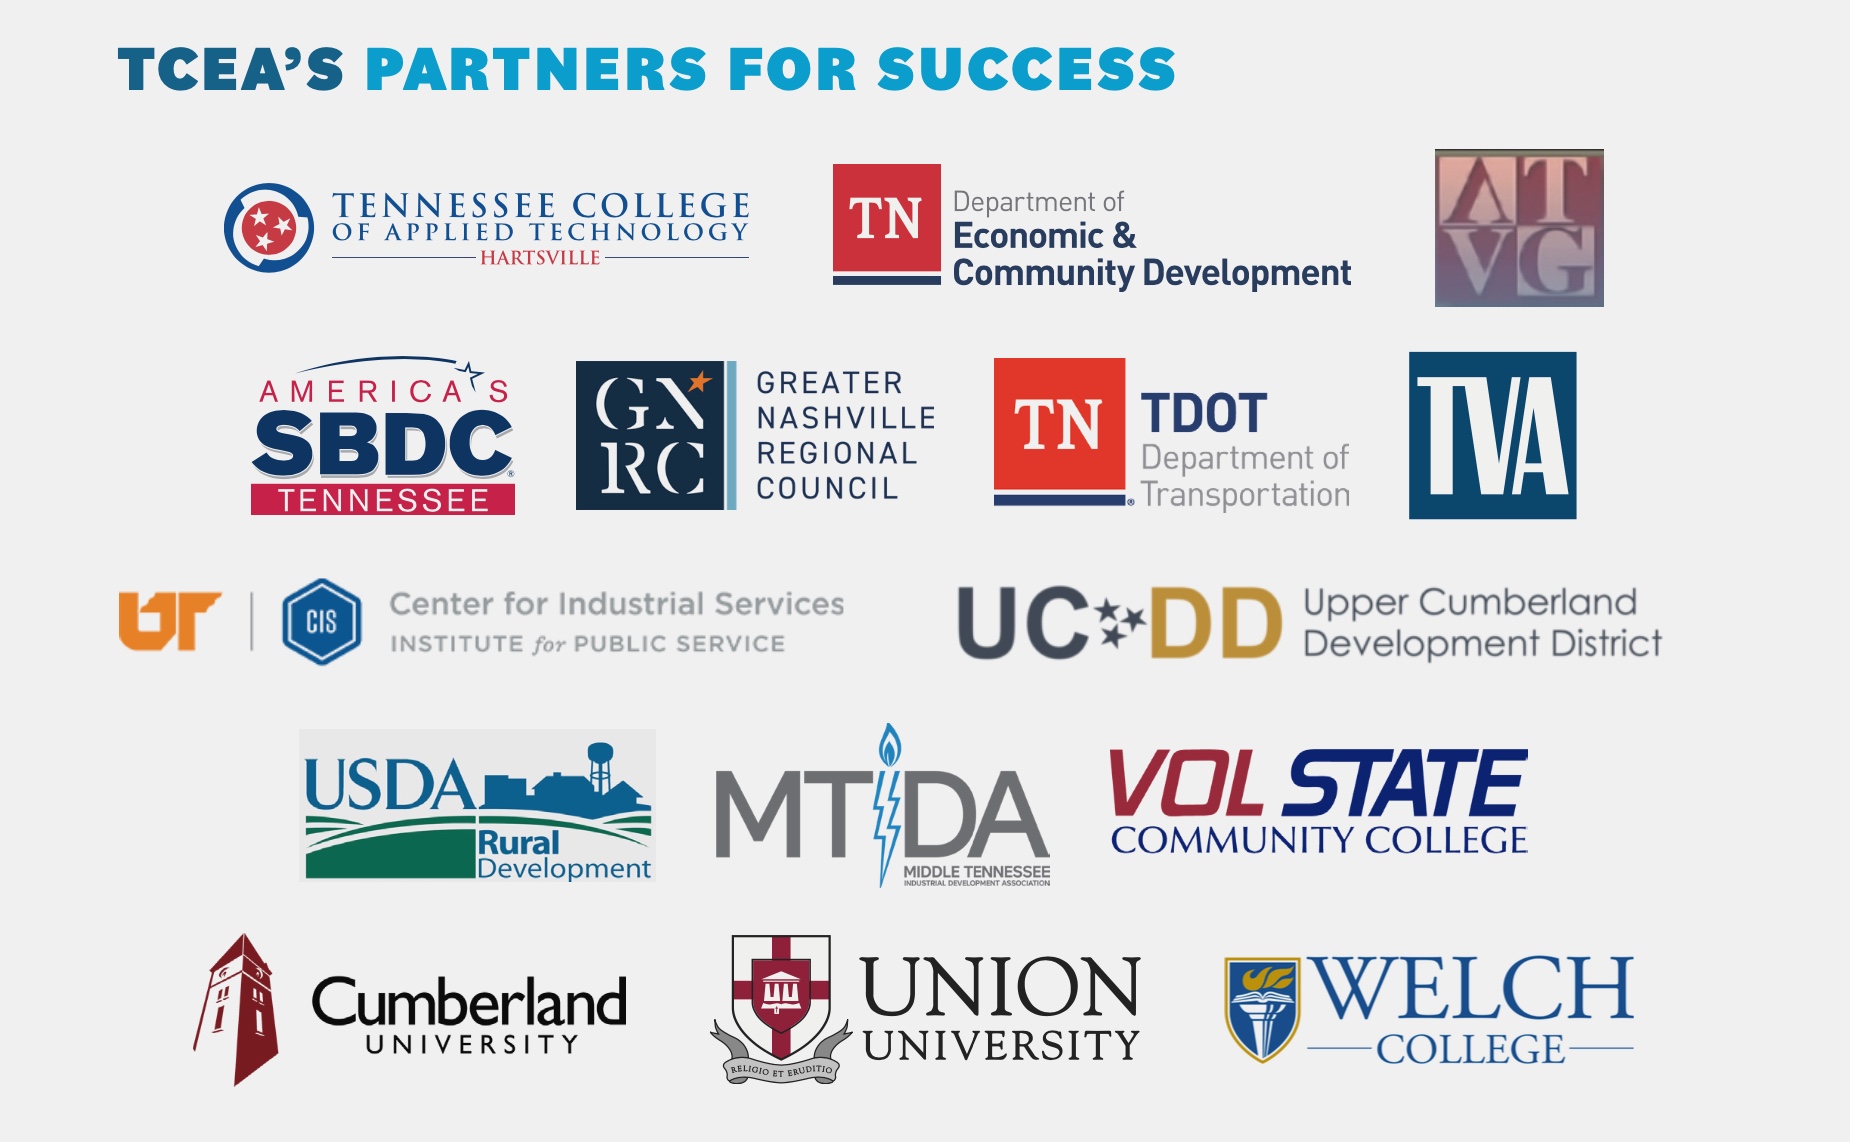 TCEA's Partners for Success